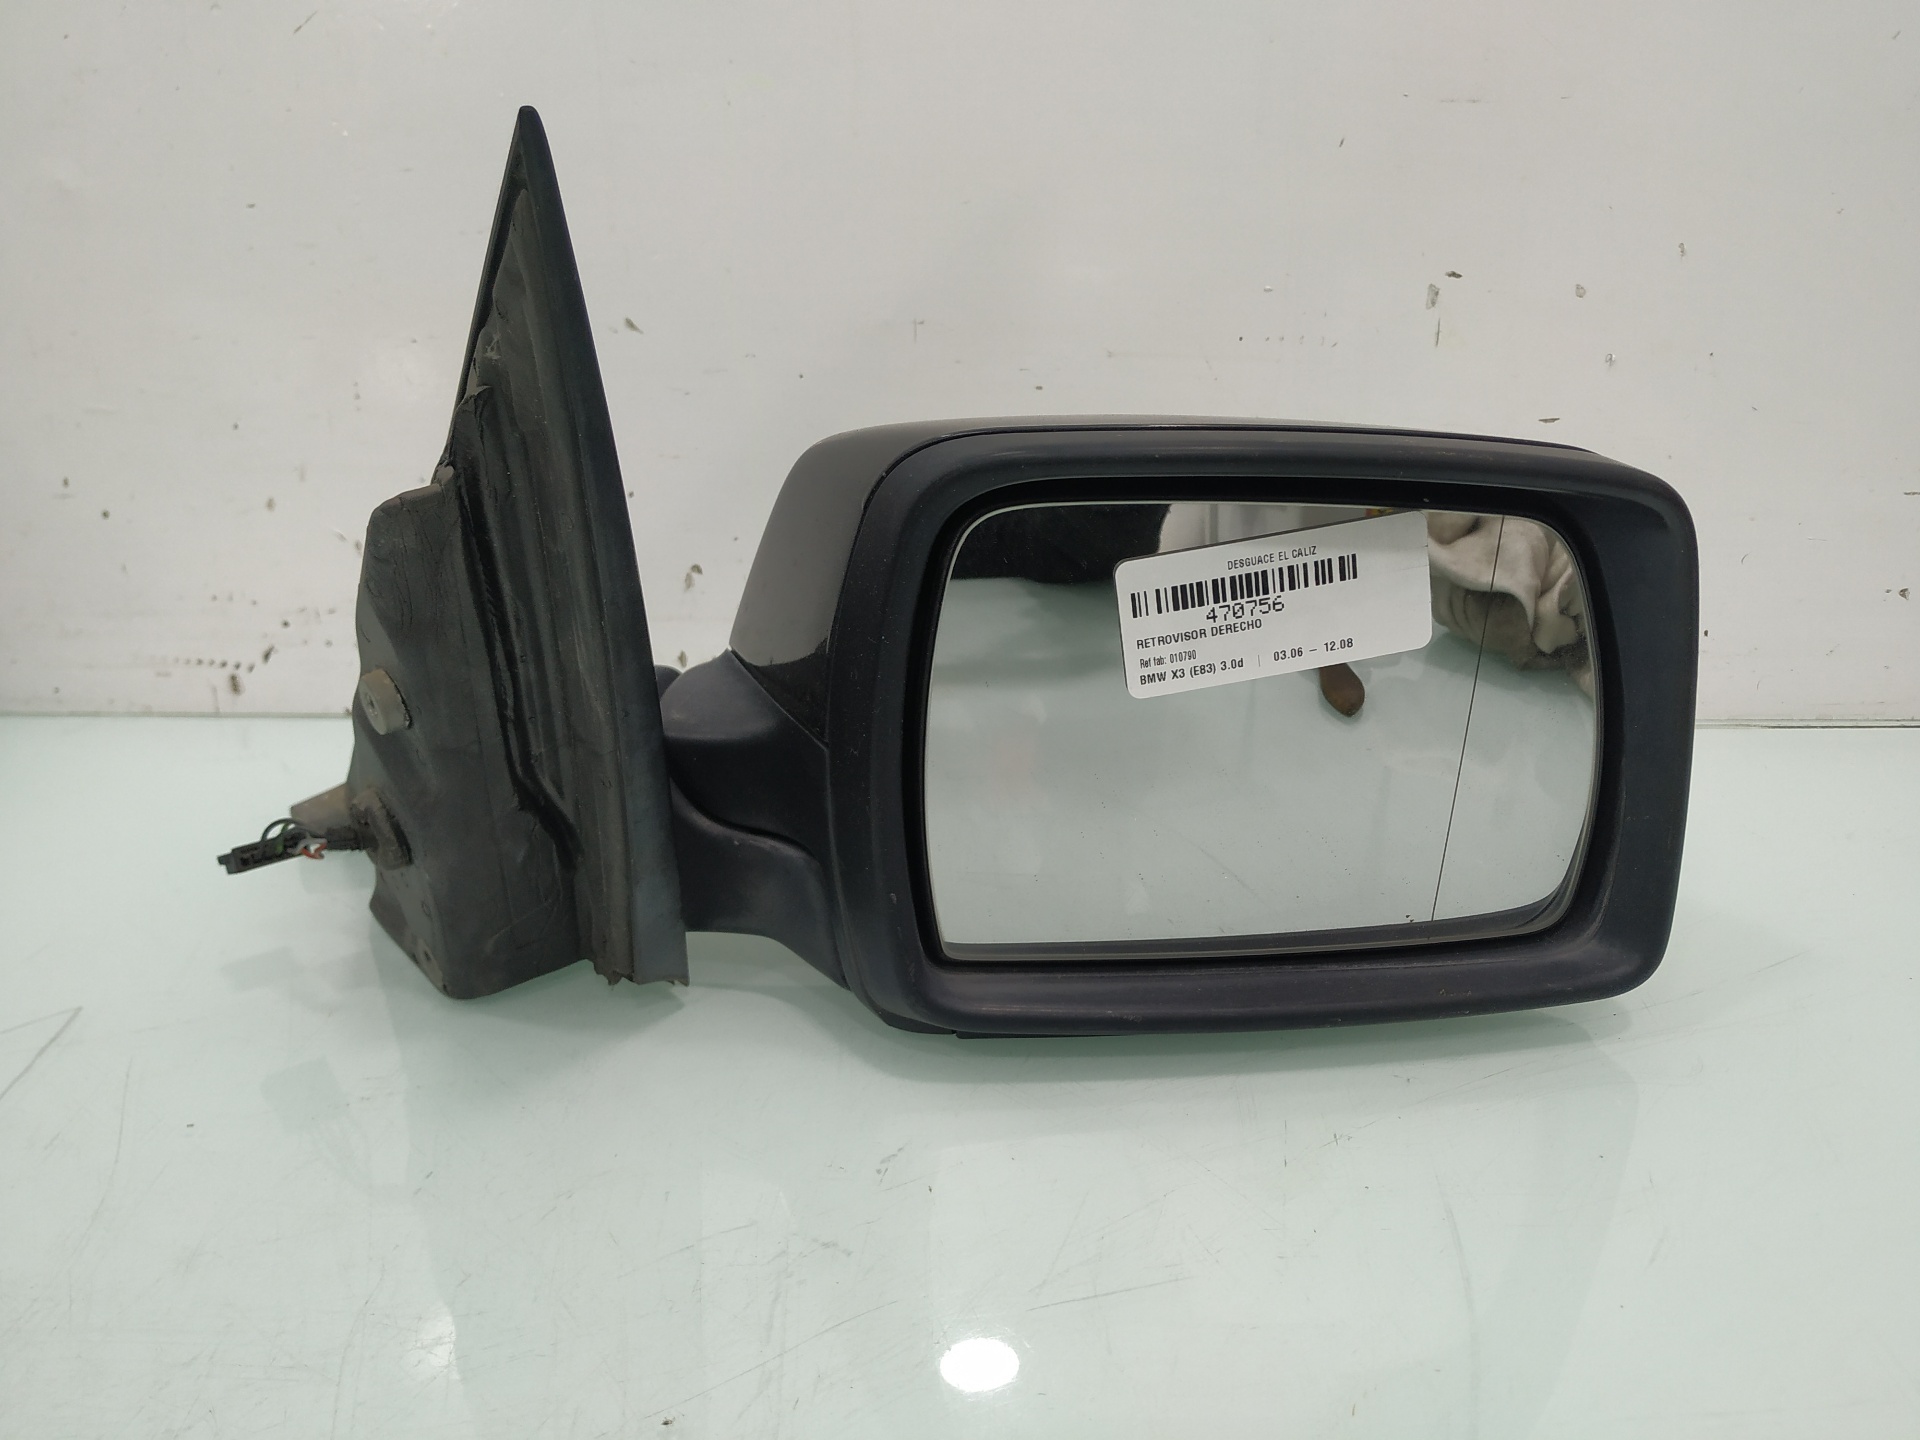 BMW X3 E83 (2003-2010) Right Side Wing Mirror 010790 24916335